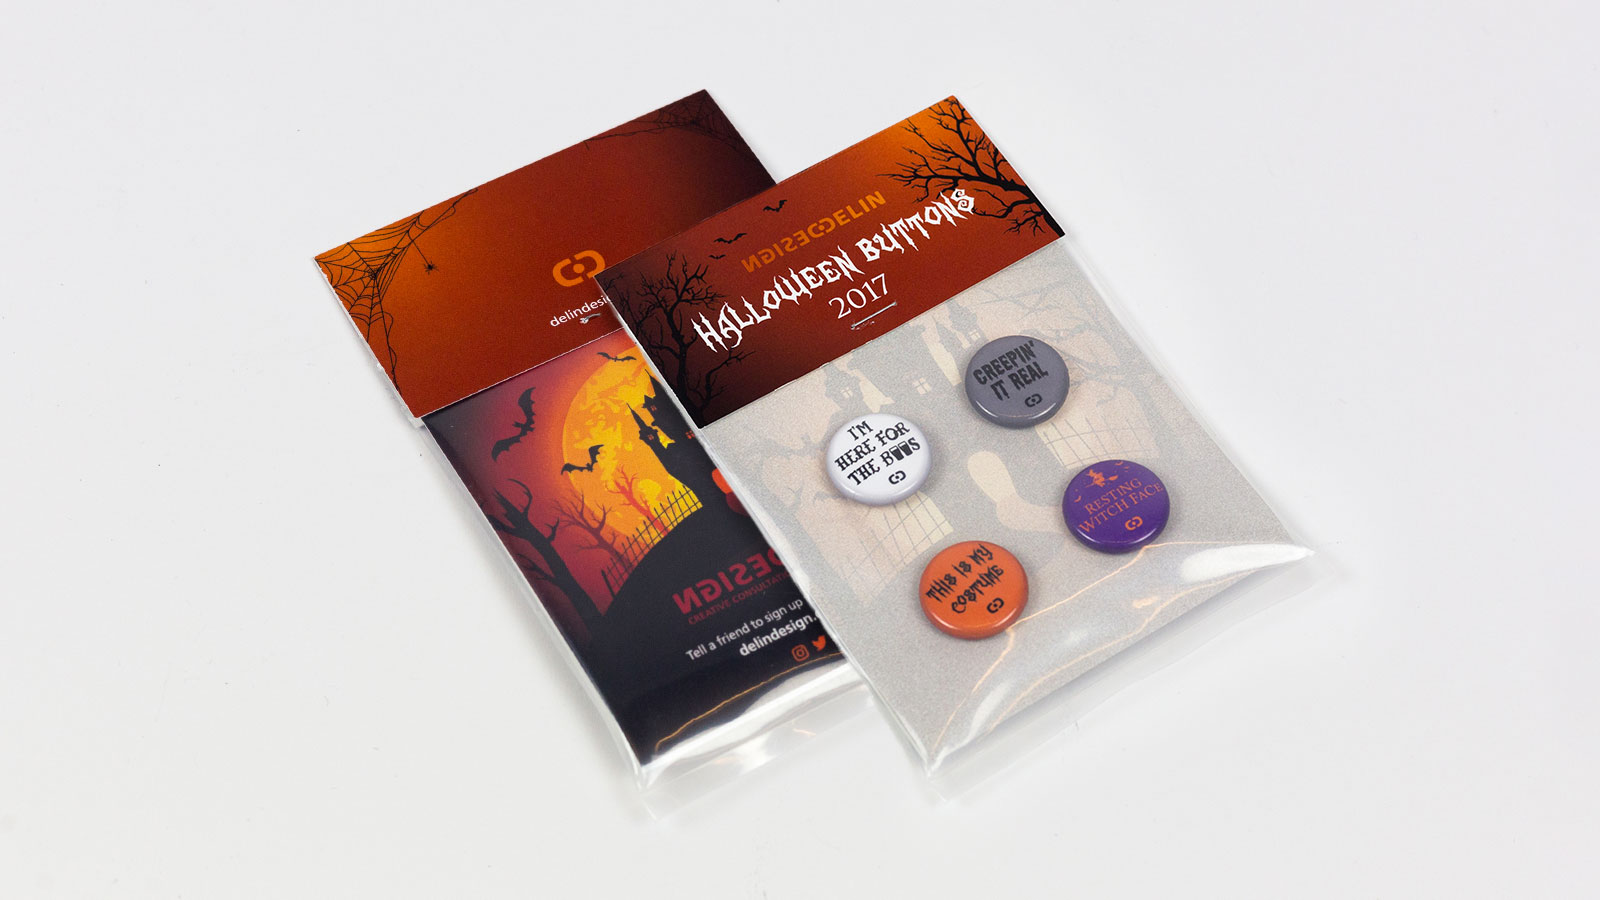 Delin Design Halloween 2017 Goodie Bag Promotion – 1" Buttons